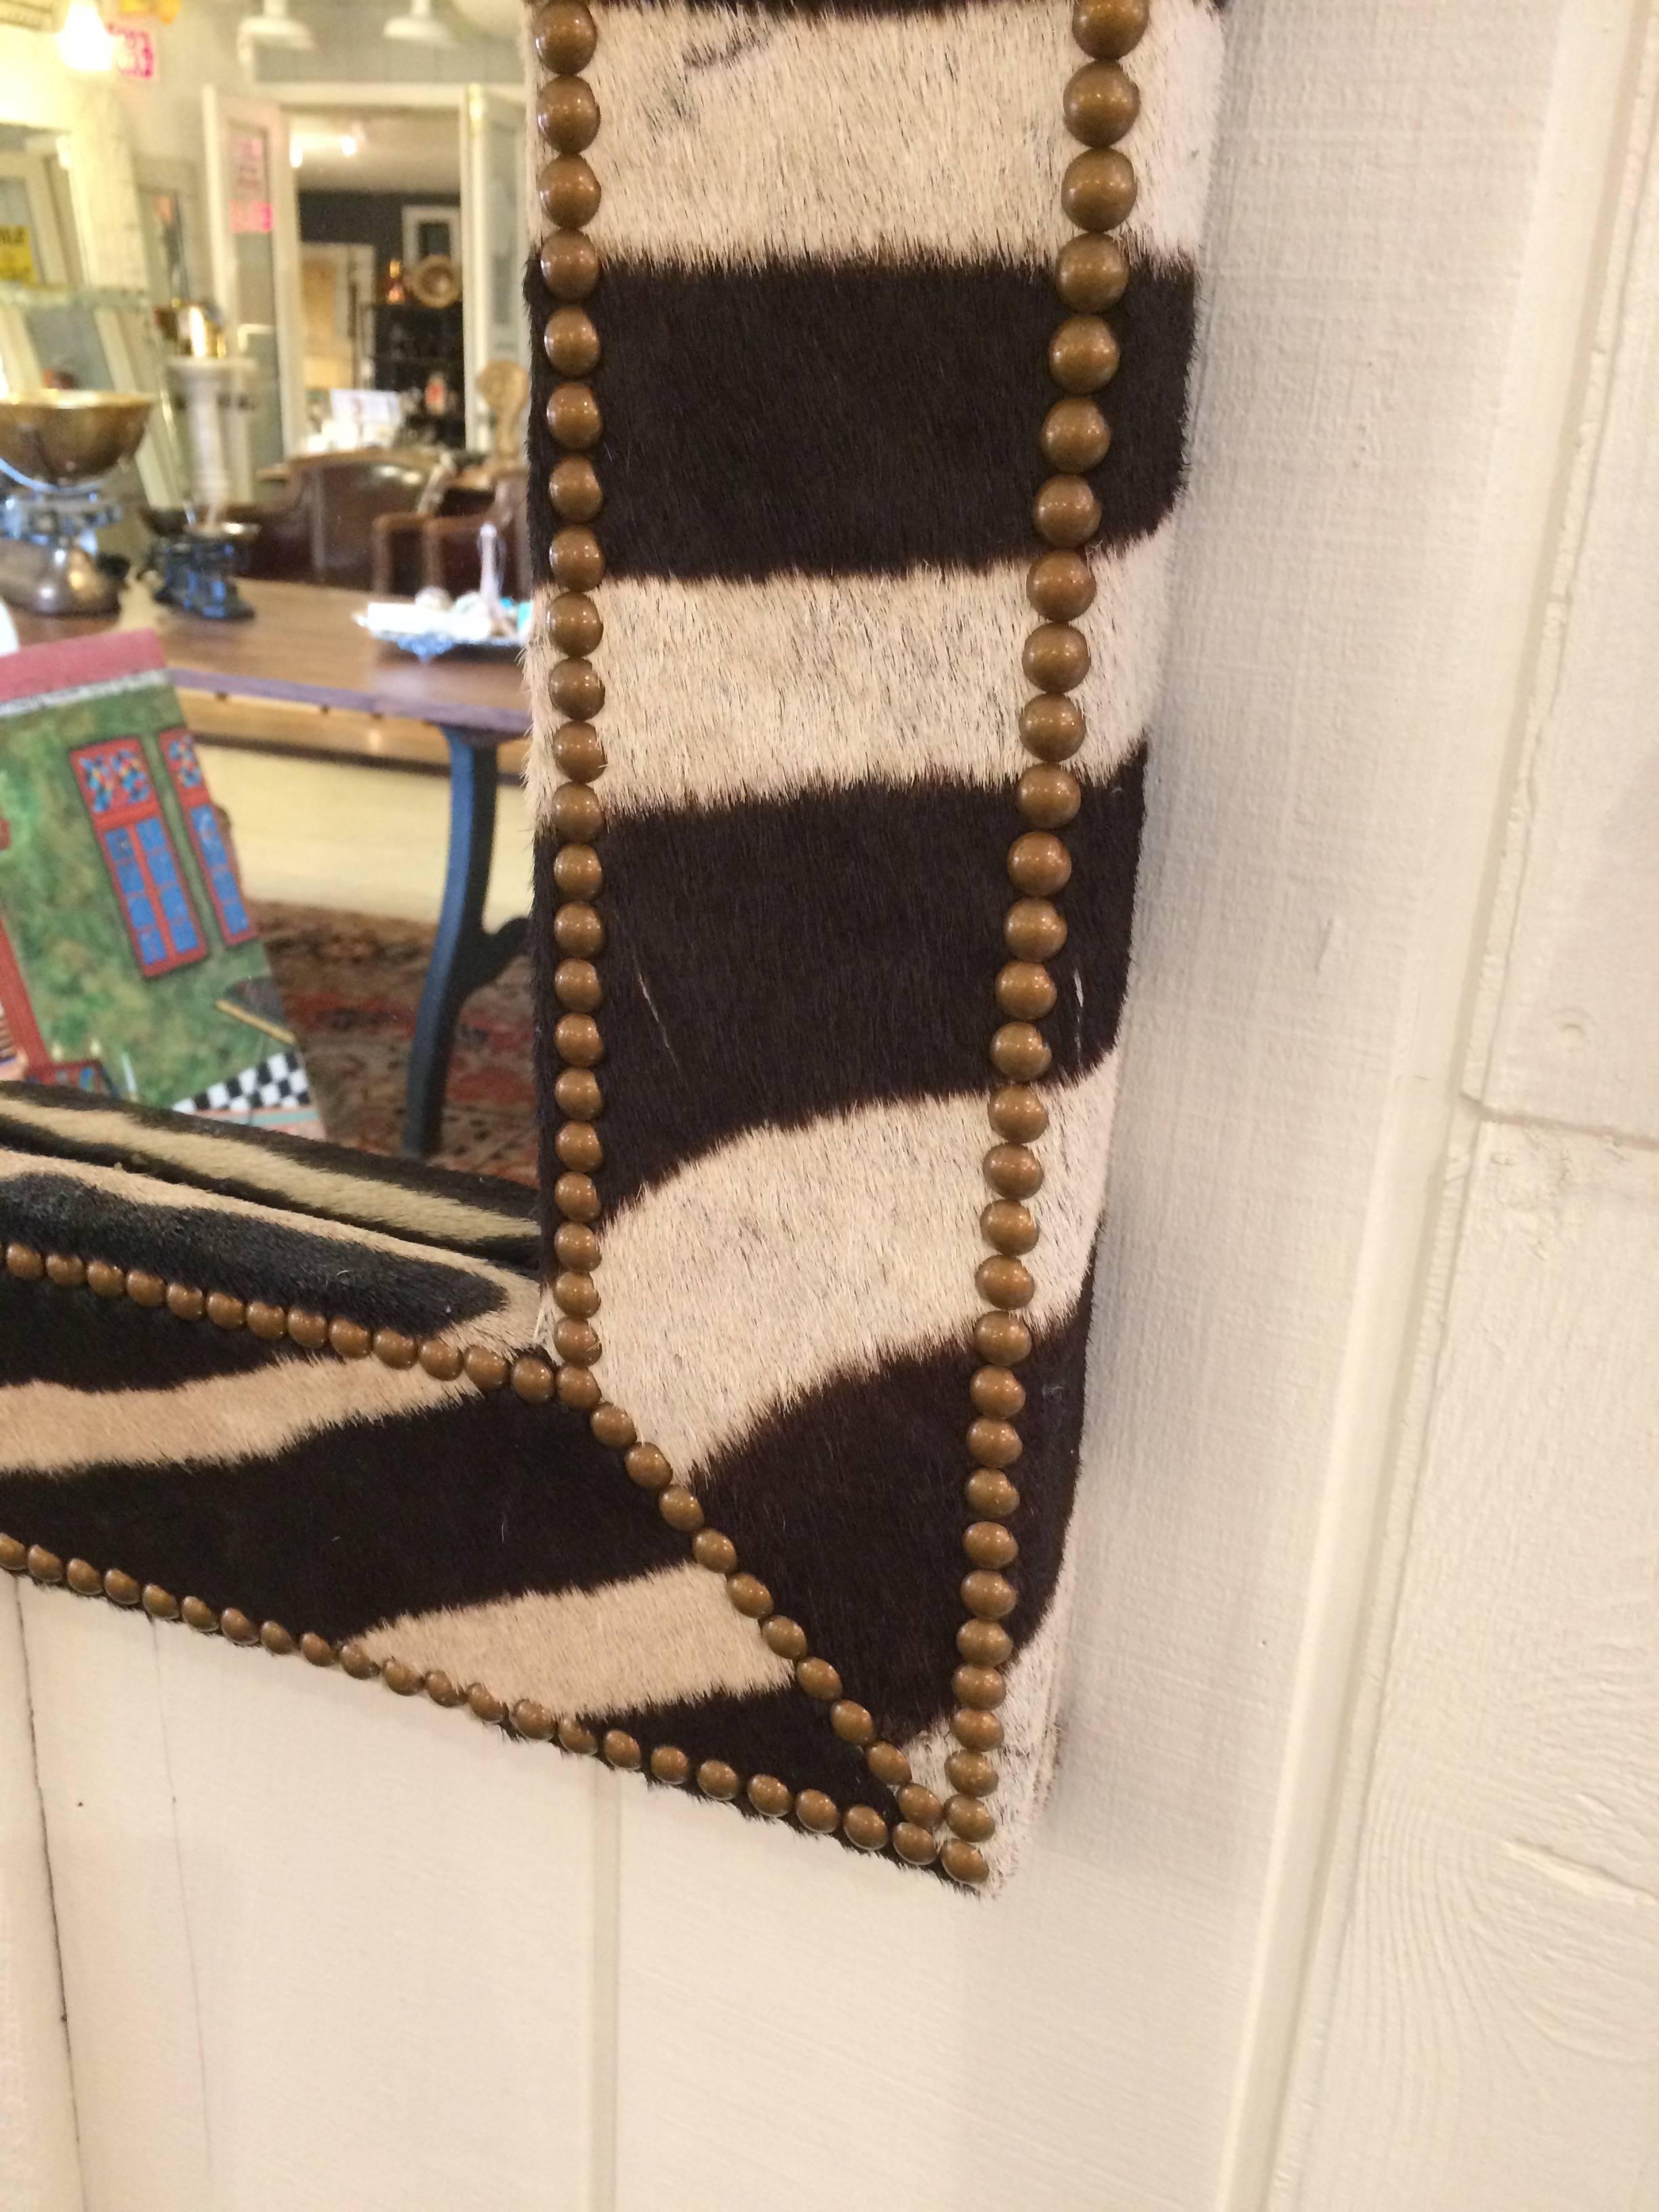 Custom-made fabulously dramatic mirror with a chunky zebra hide upholstered frame finished with brass nailheads.